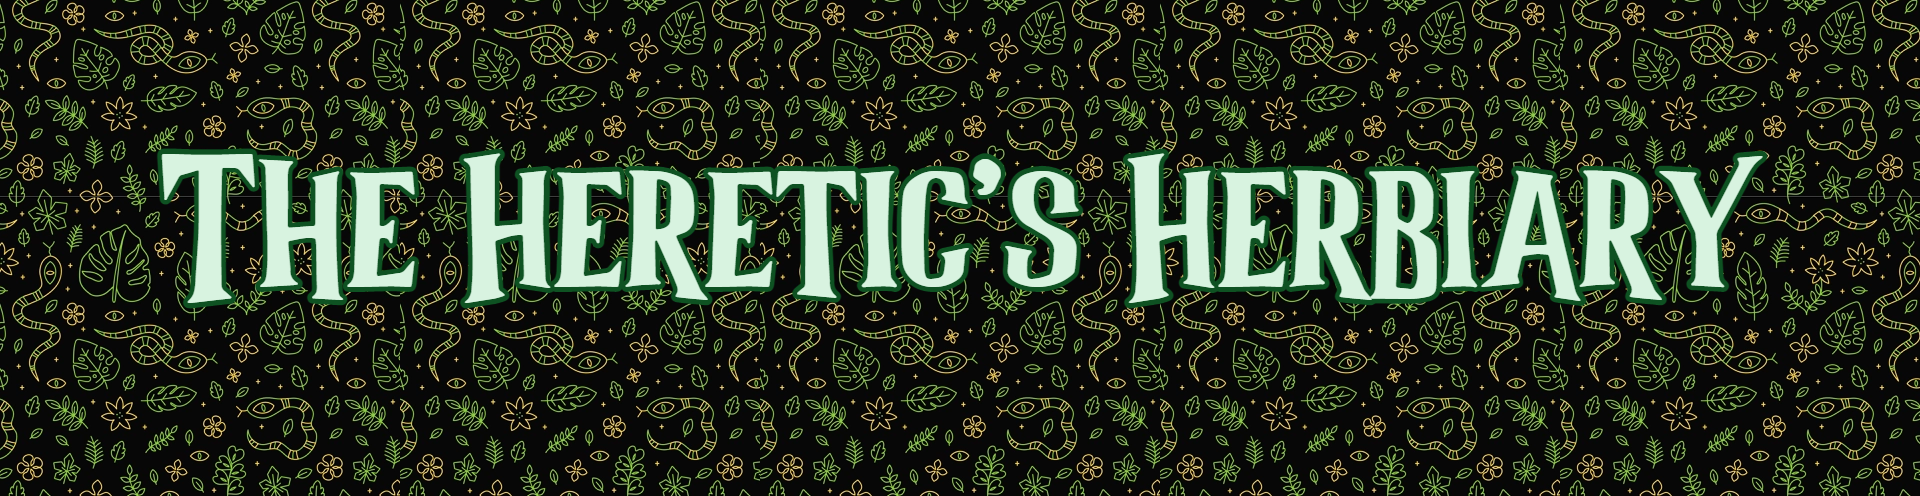 The Heretic's Herbiary vol #14